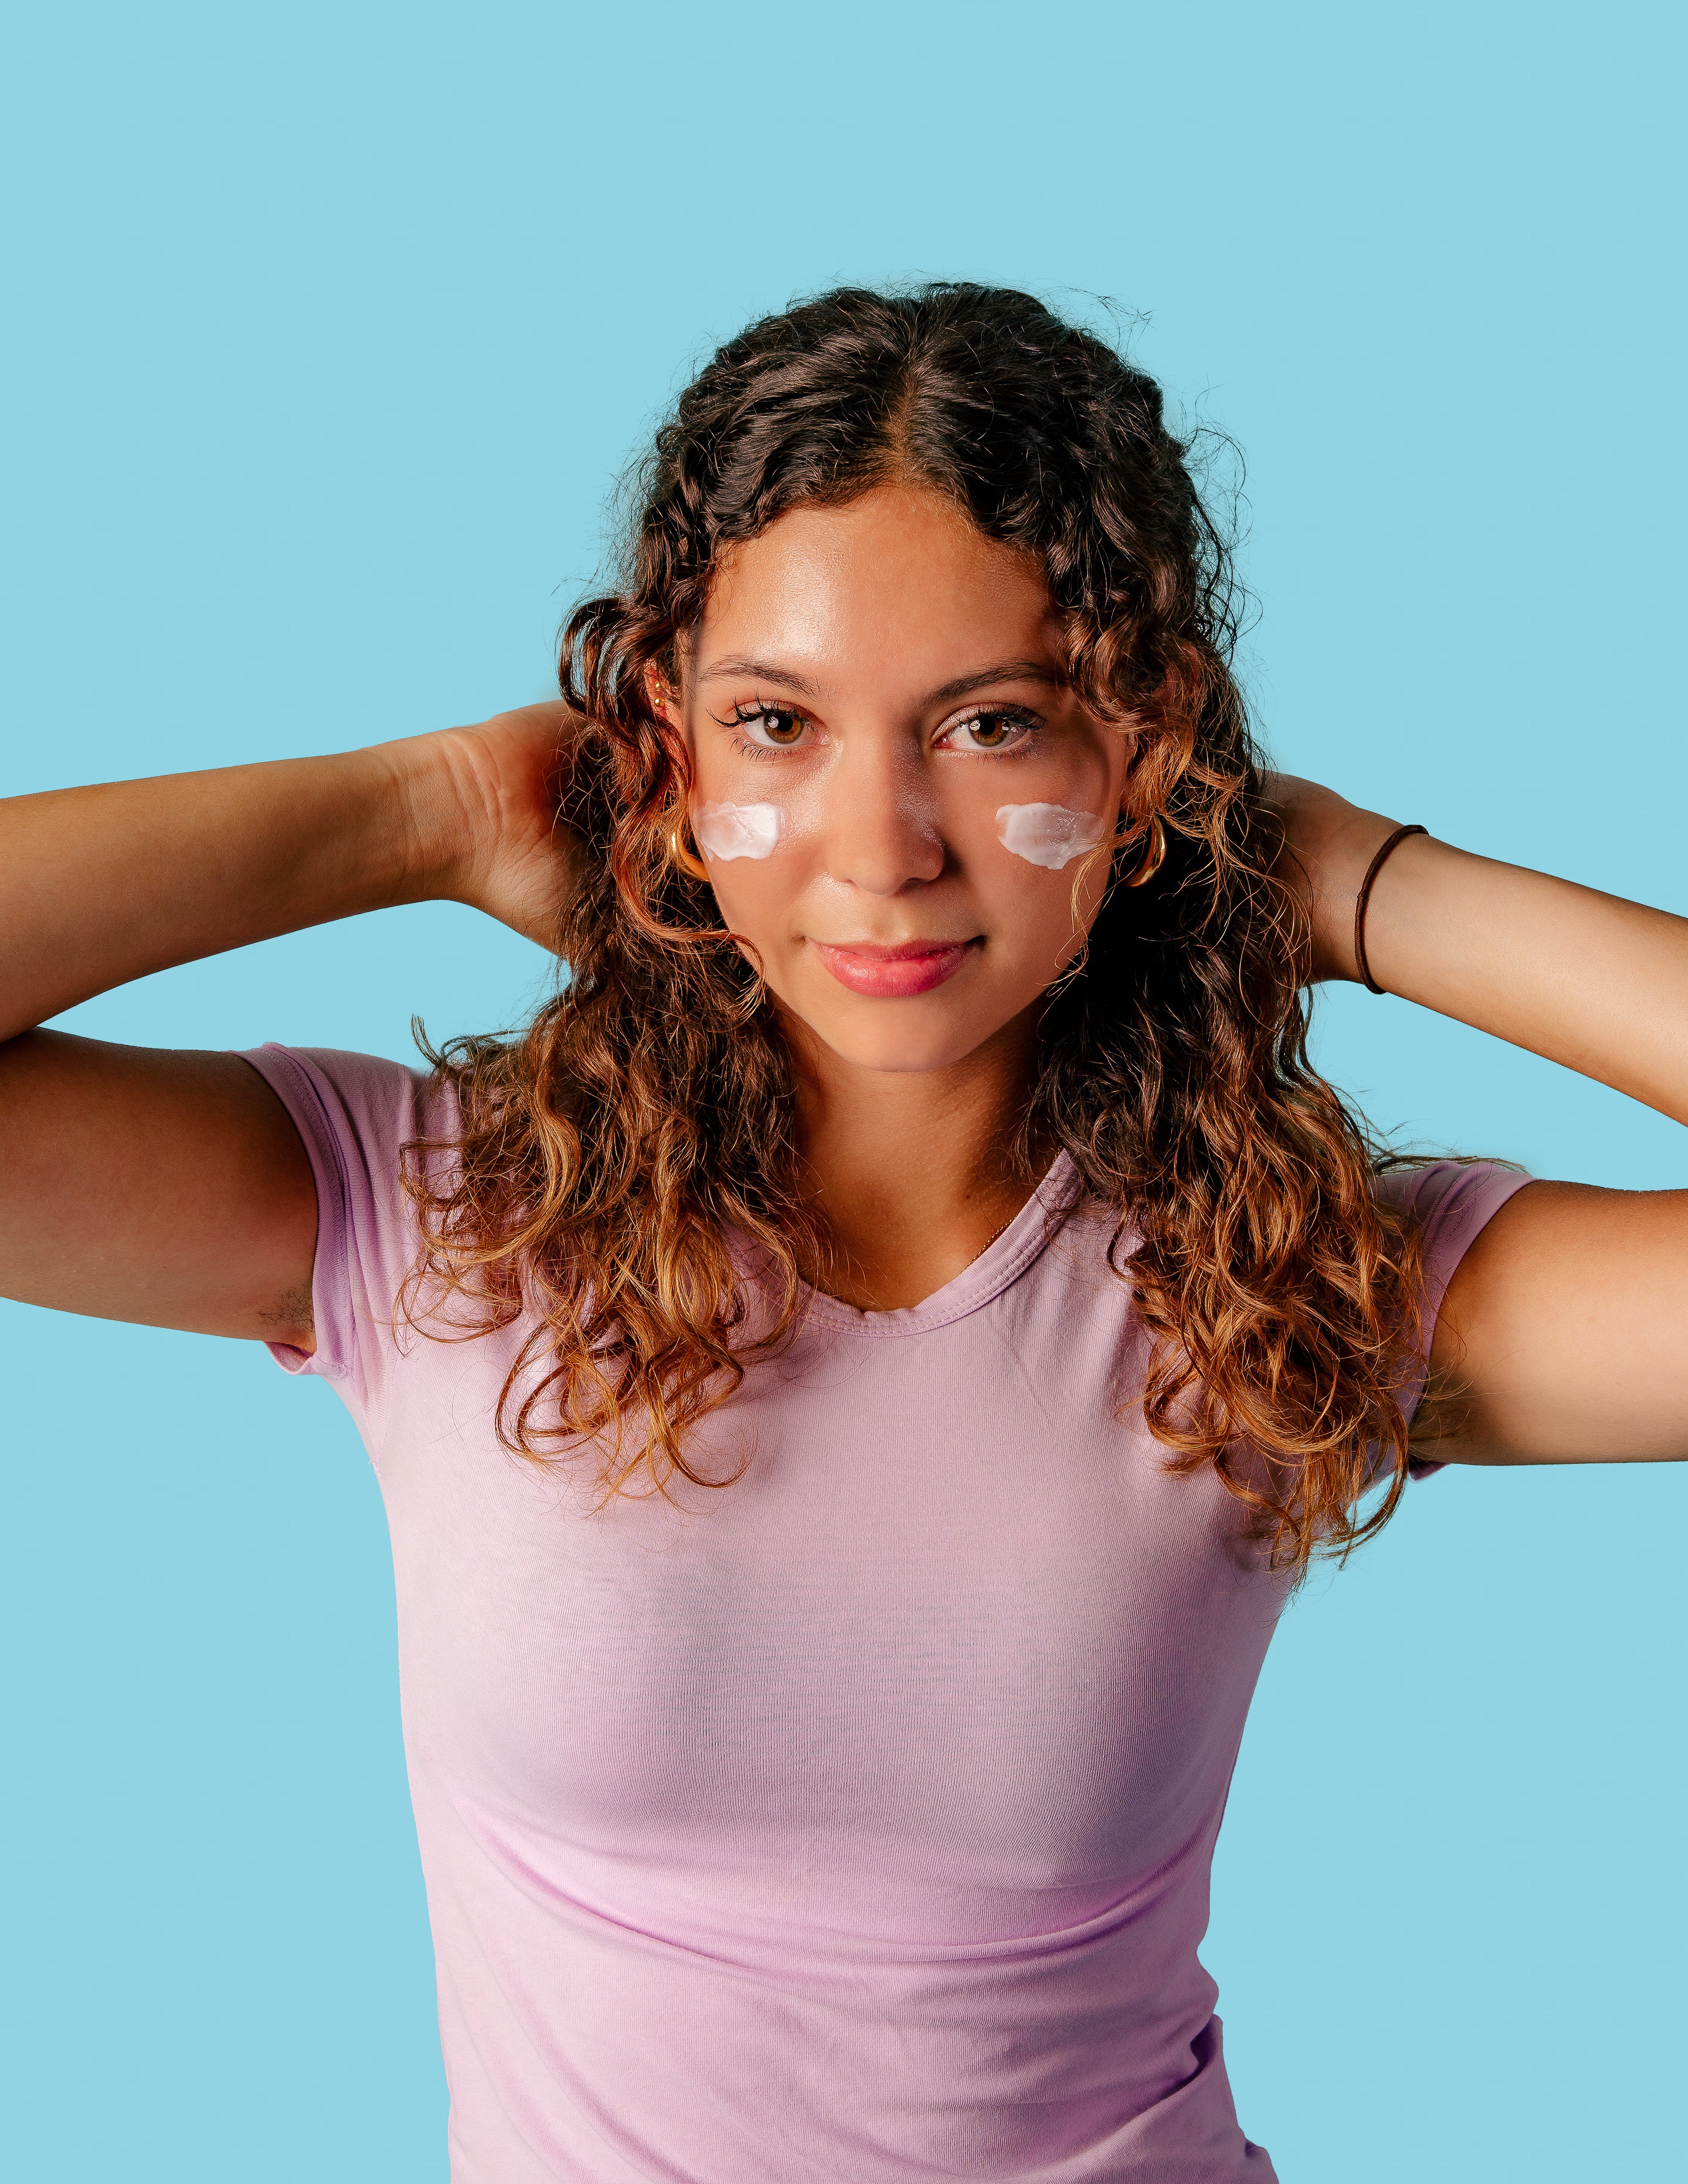 3 Simple Tips to Help That Irritated Skin